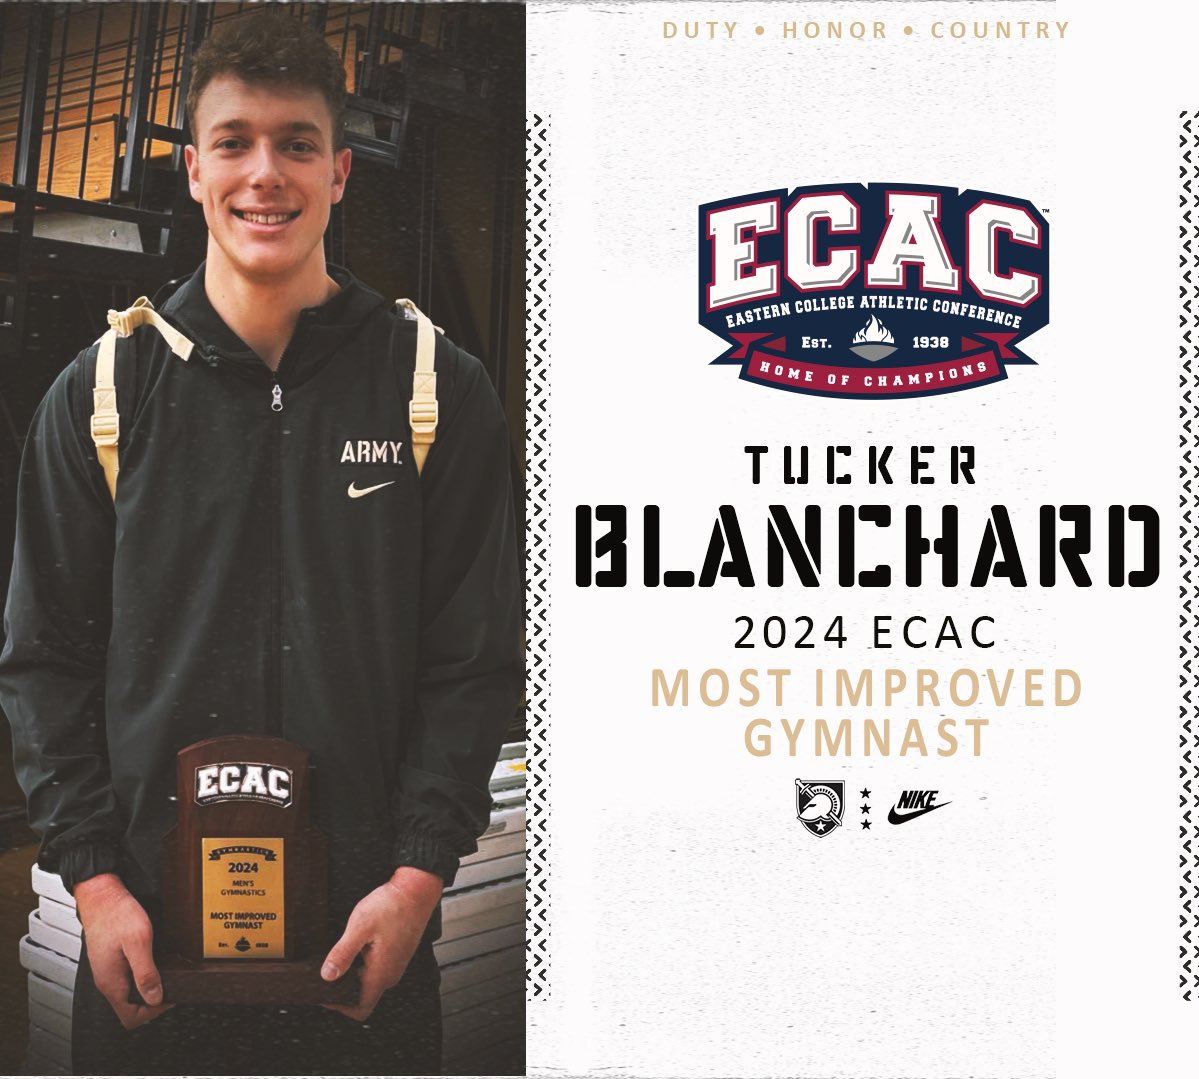 Another congratulations is in order for our guy Tucker who was named the 2024 ECAC Most Improved Gymnast 👏👏 #GoArmy